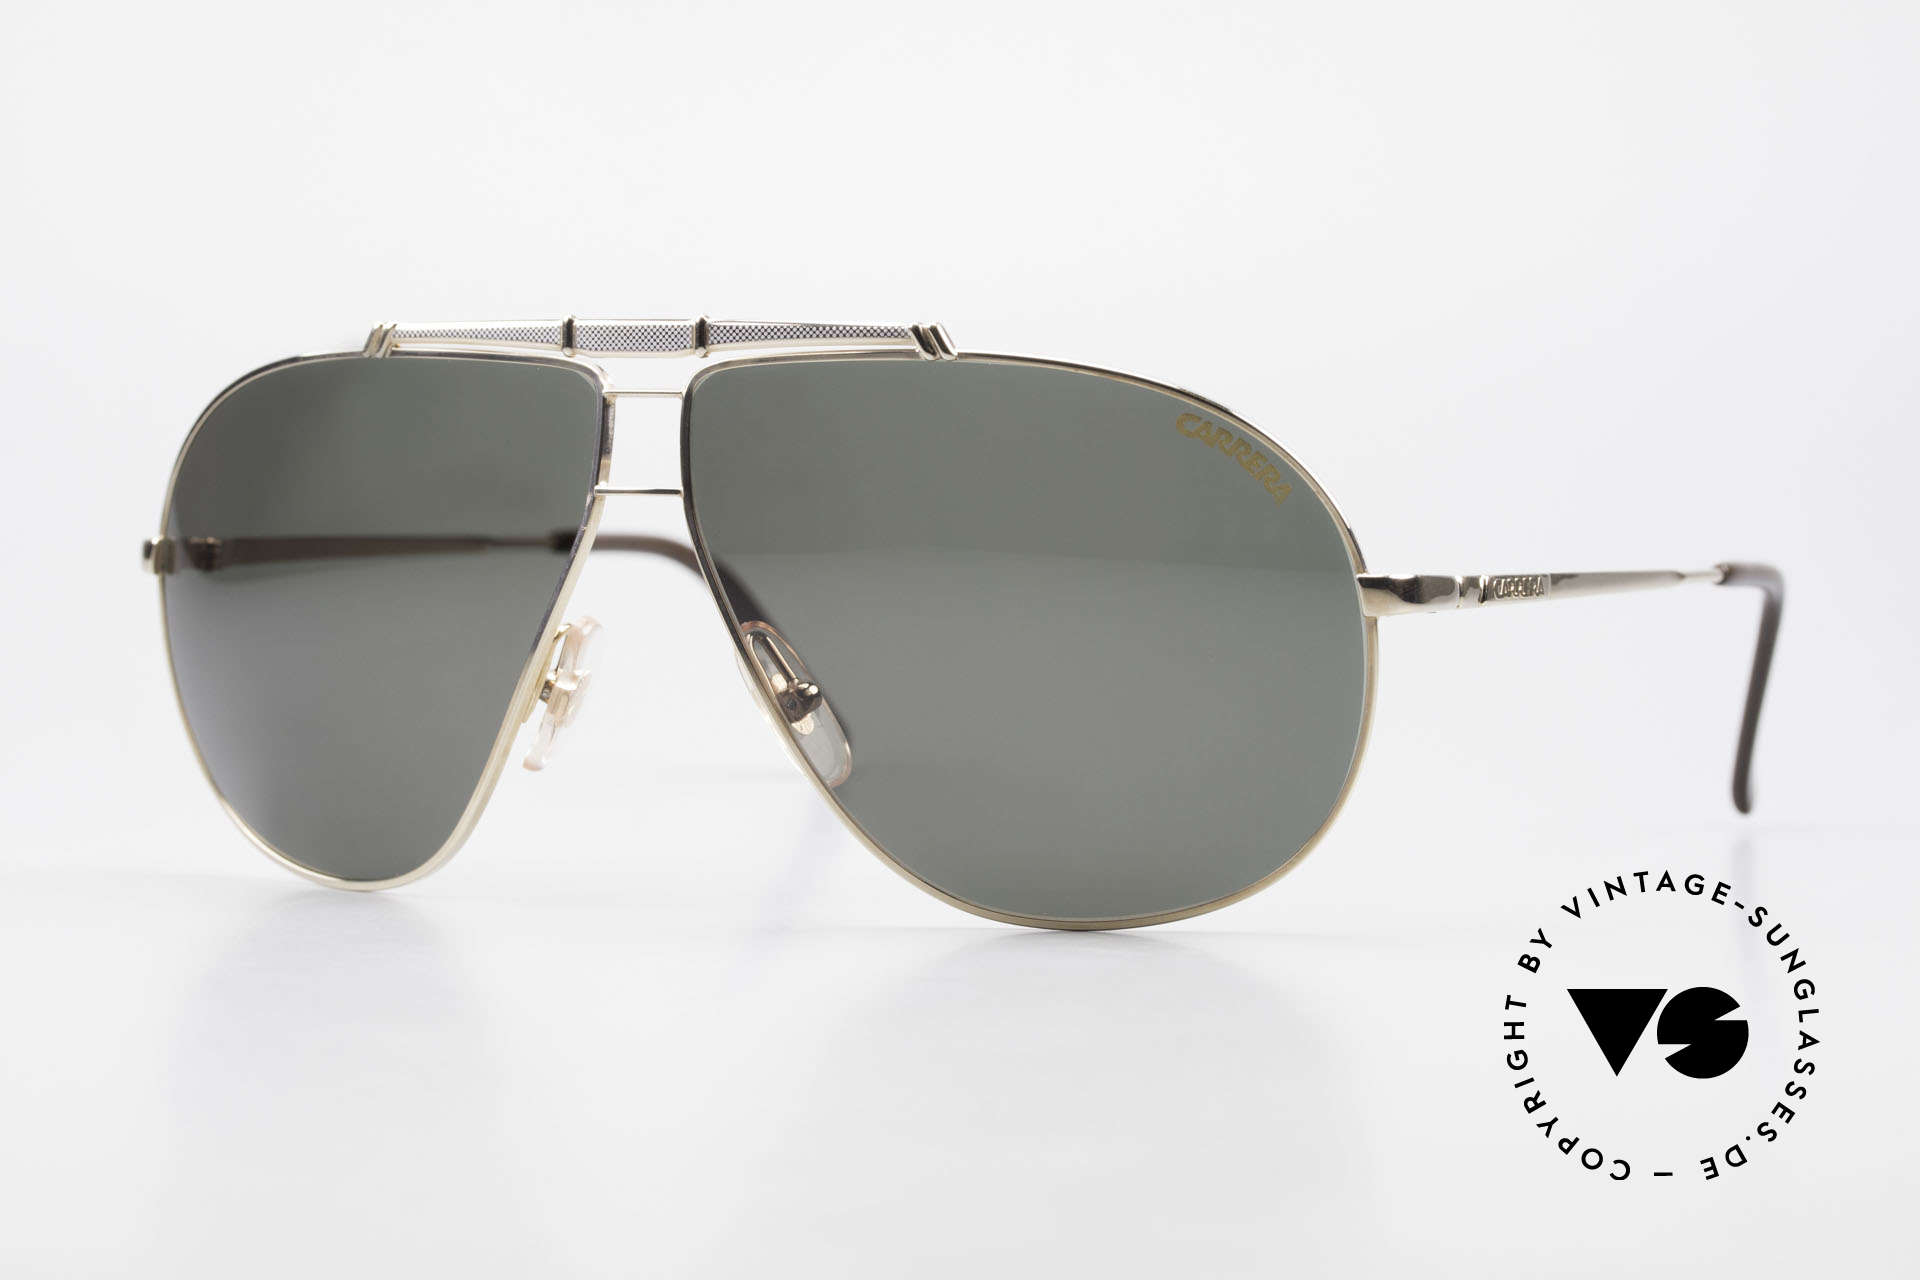 Carrera 5401 Large Aviator Shades Extra Lenses, Carrera shades of the Carrera Collection from 1989/90, Made for Men